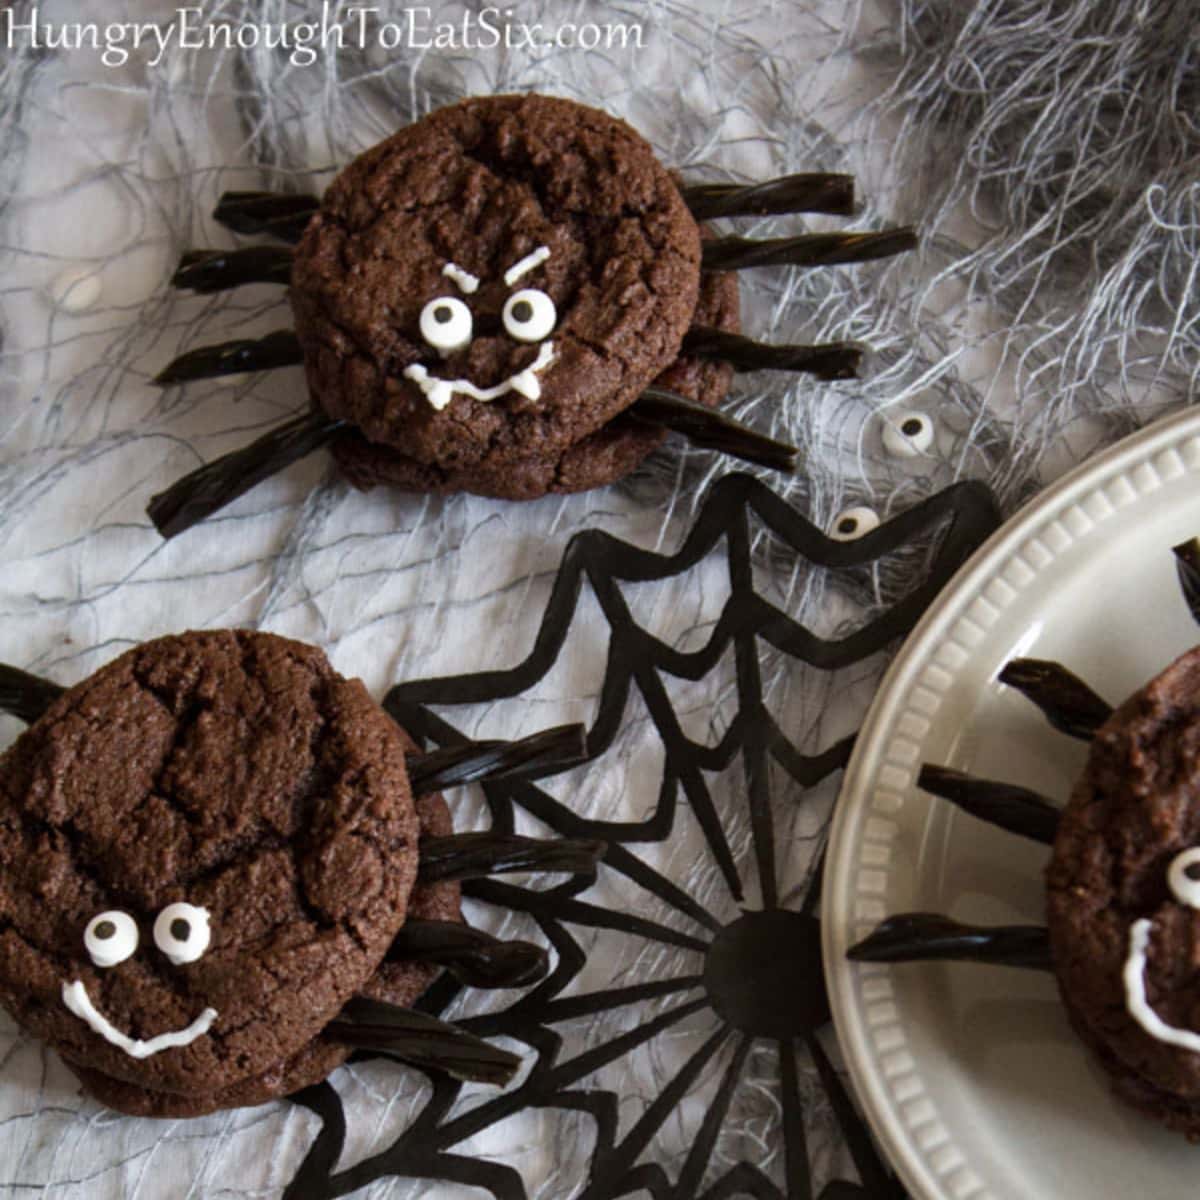 Chocolate sandwiched cookies with decorations to look like spiders